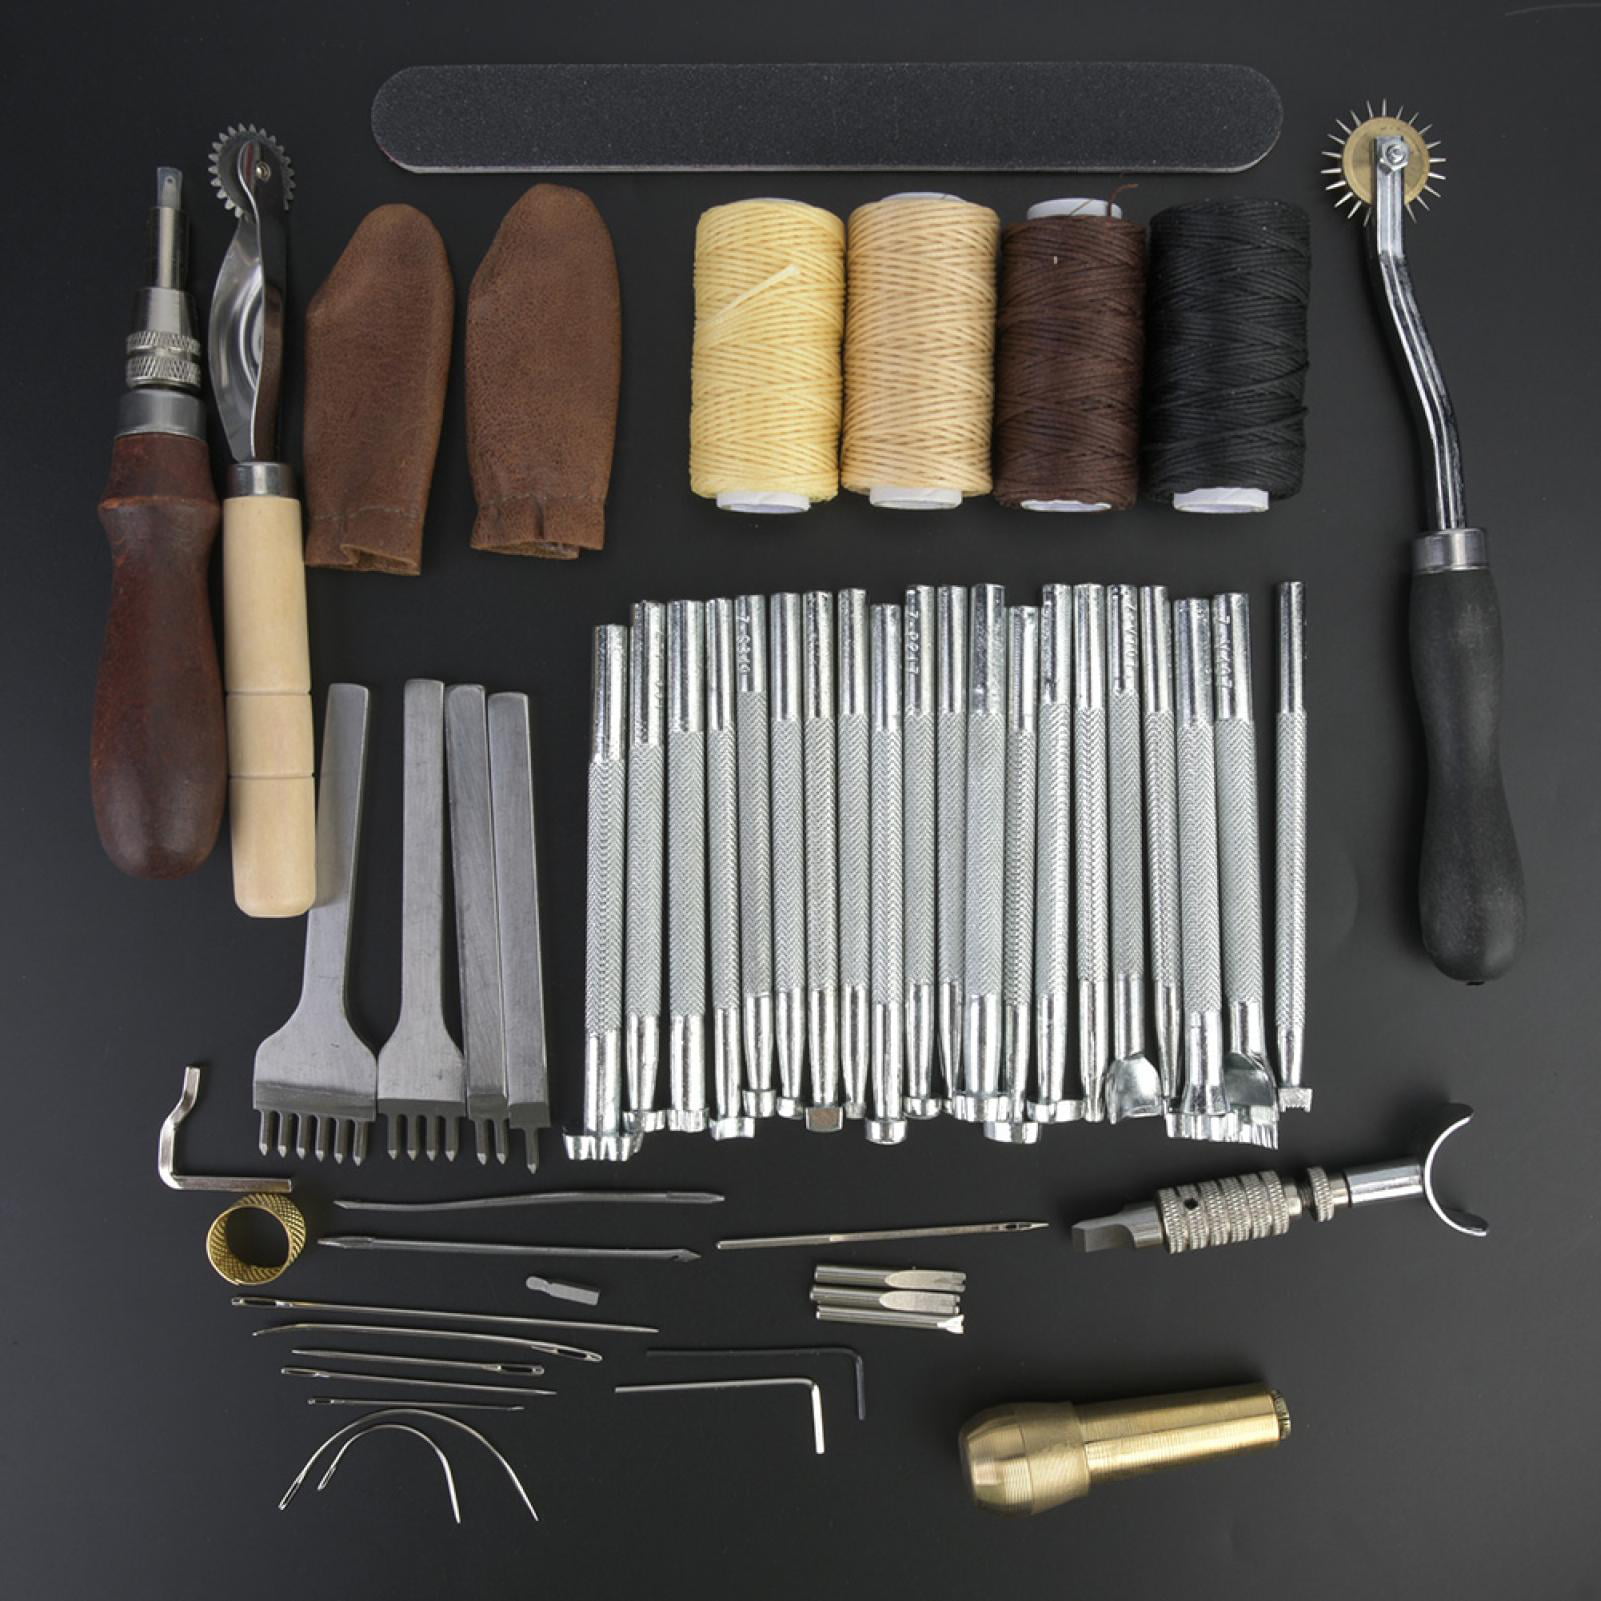 KRABALL Leather Working Tools and Supplies Tooling Kit Working Set for  Beginners DIY Sewing Craft Leathercraft Adults Gifts - AliExpress